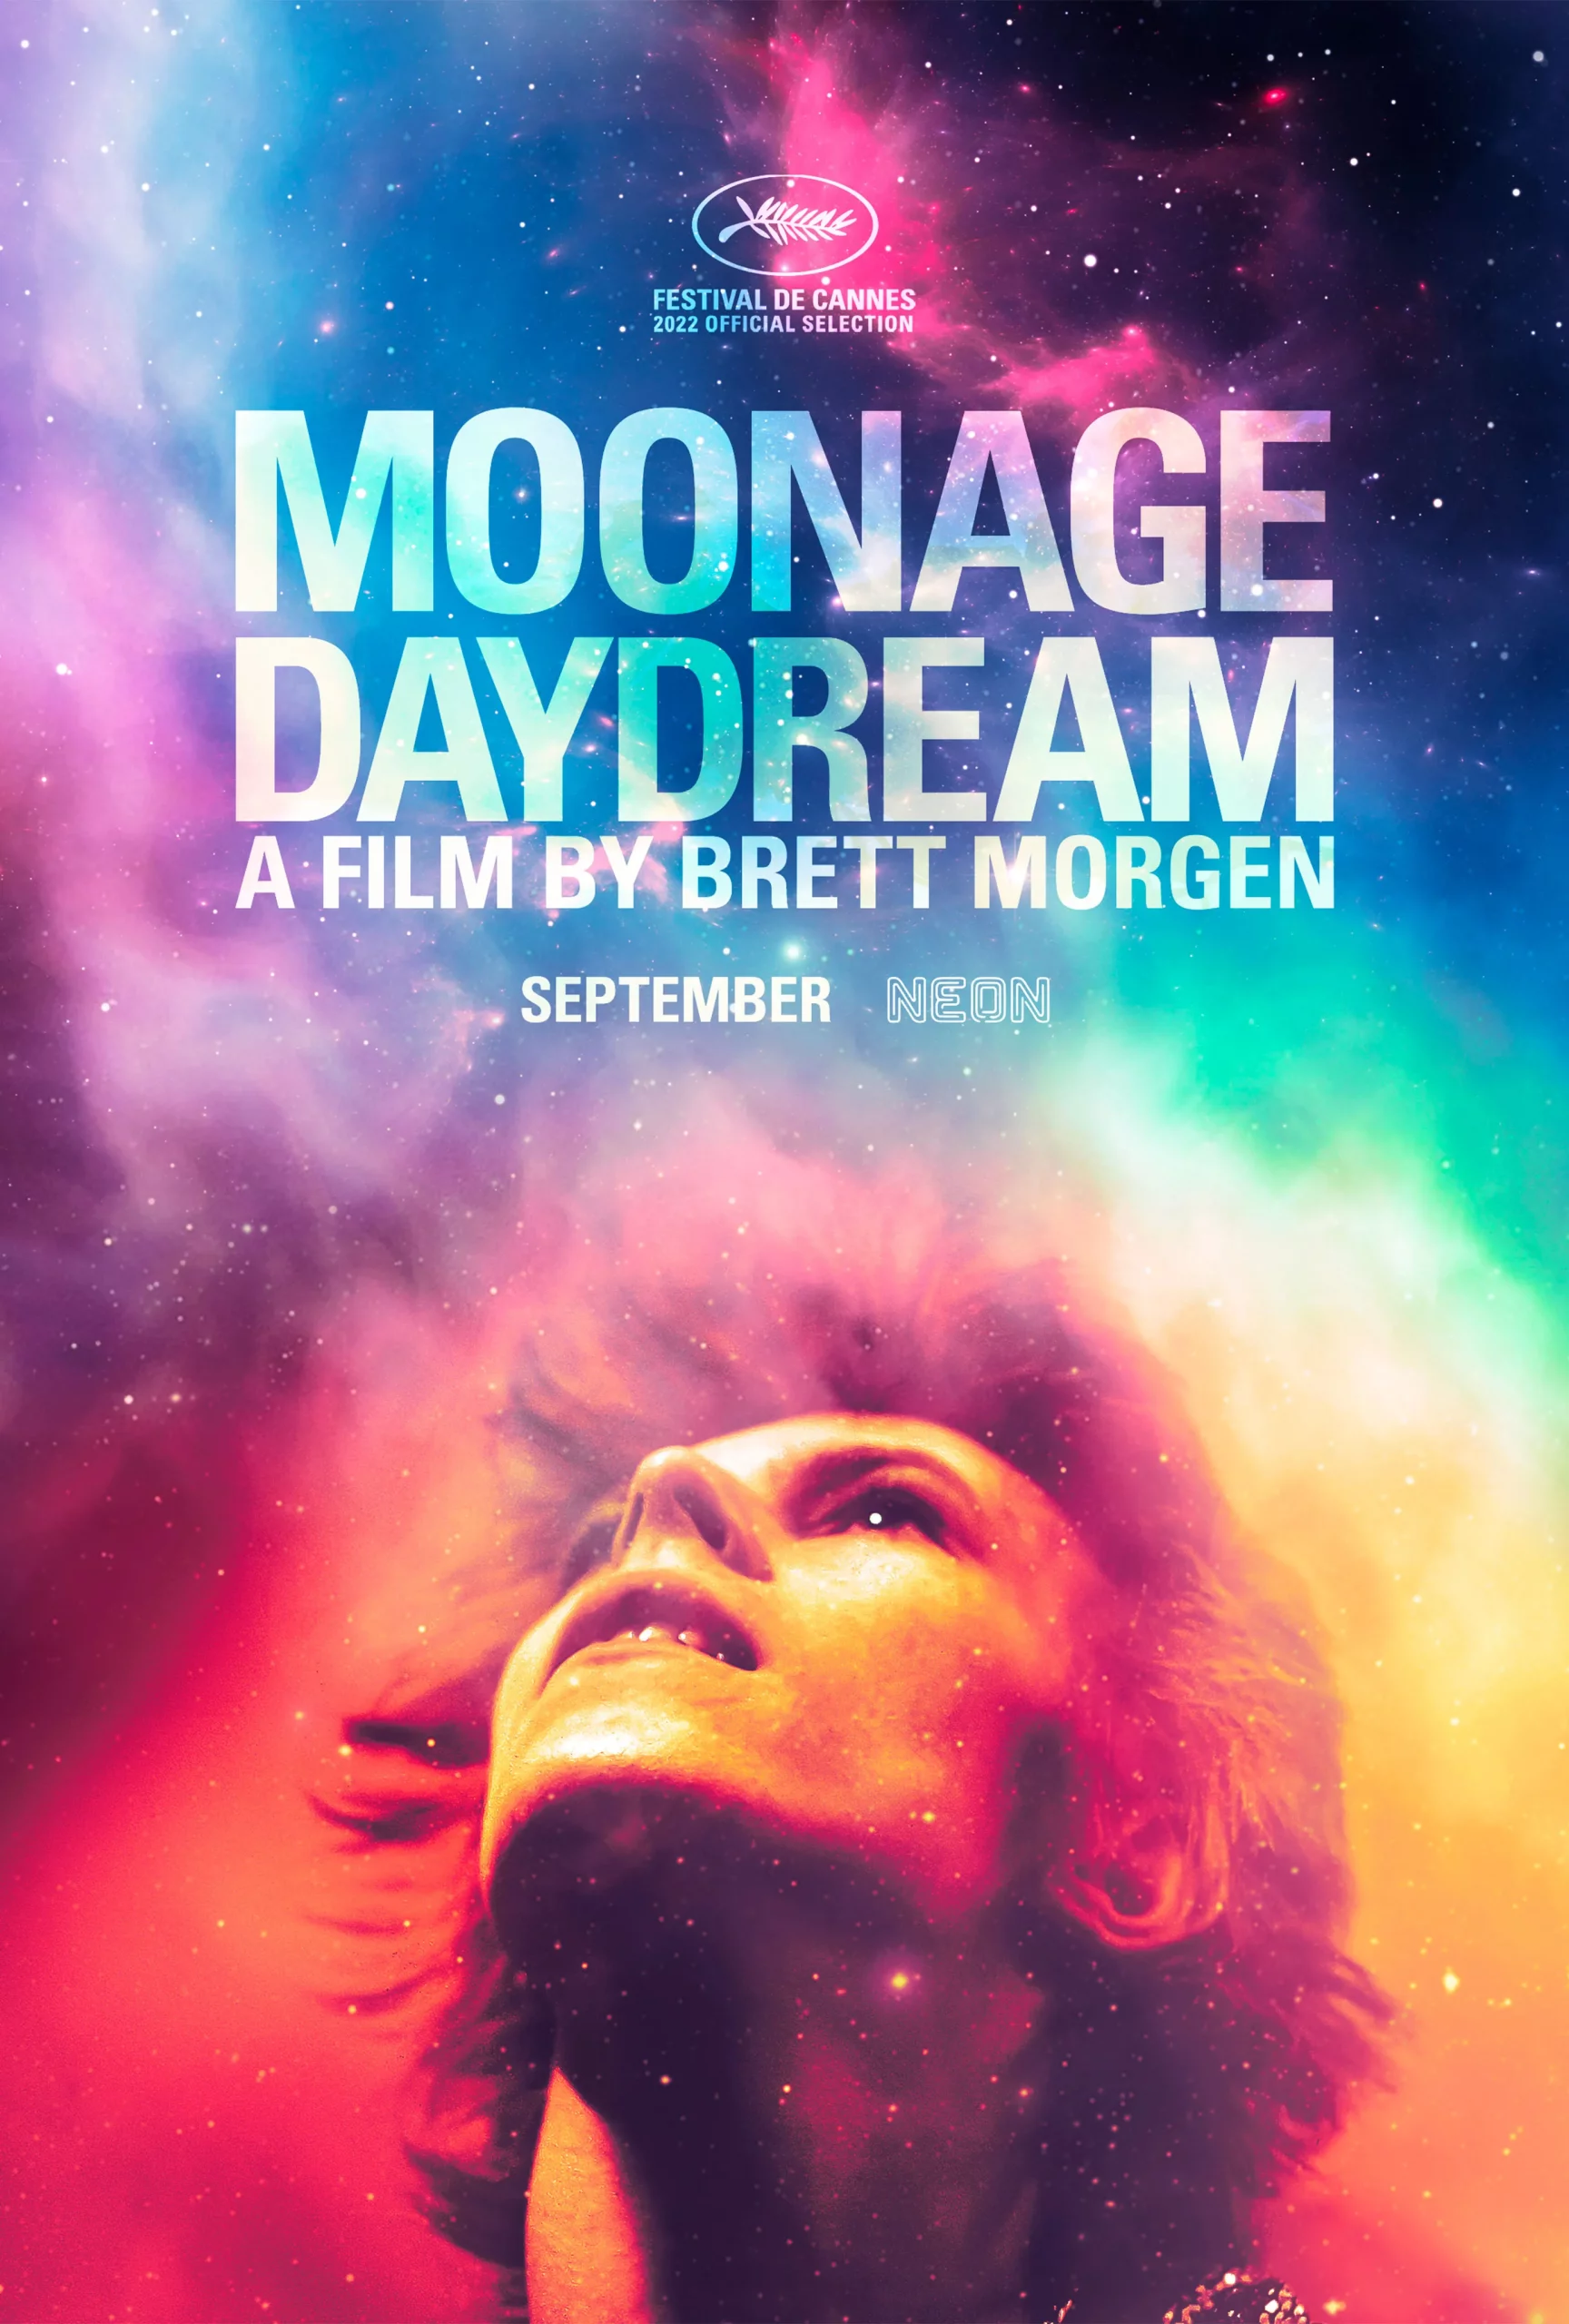 Trailer and poster for David Bowie's documentary 'Moonage Daydream‎', which is set to hit theaters on September 16 this year | FMV6